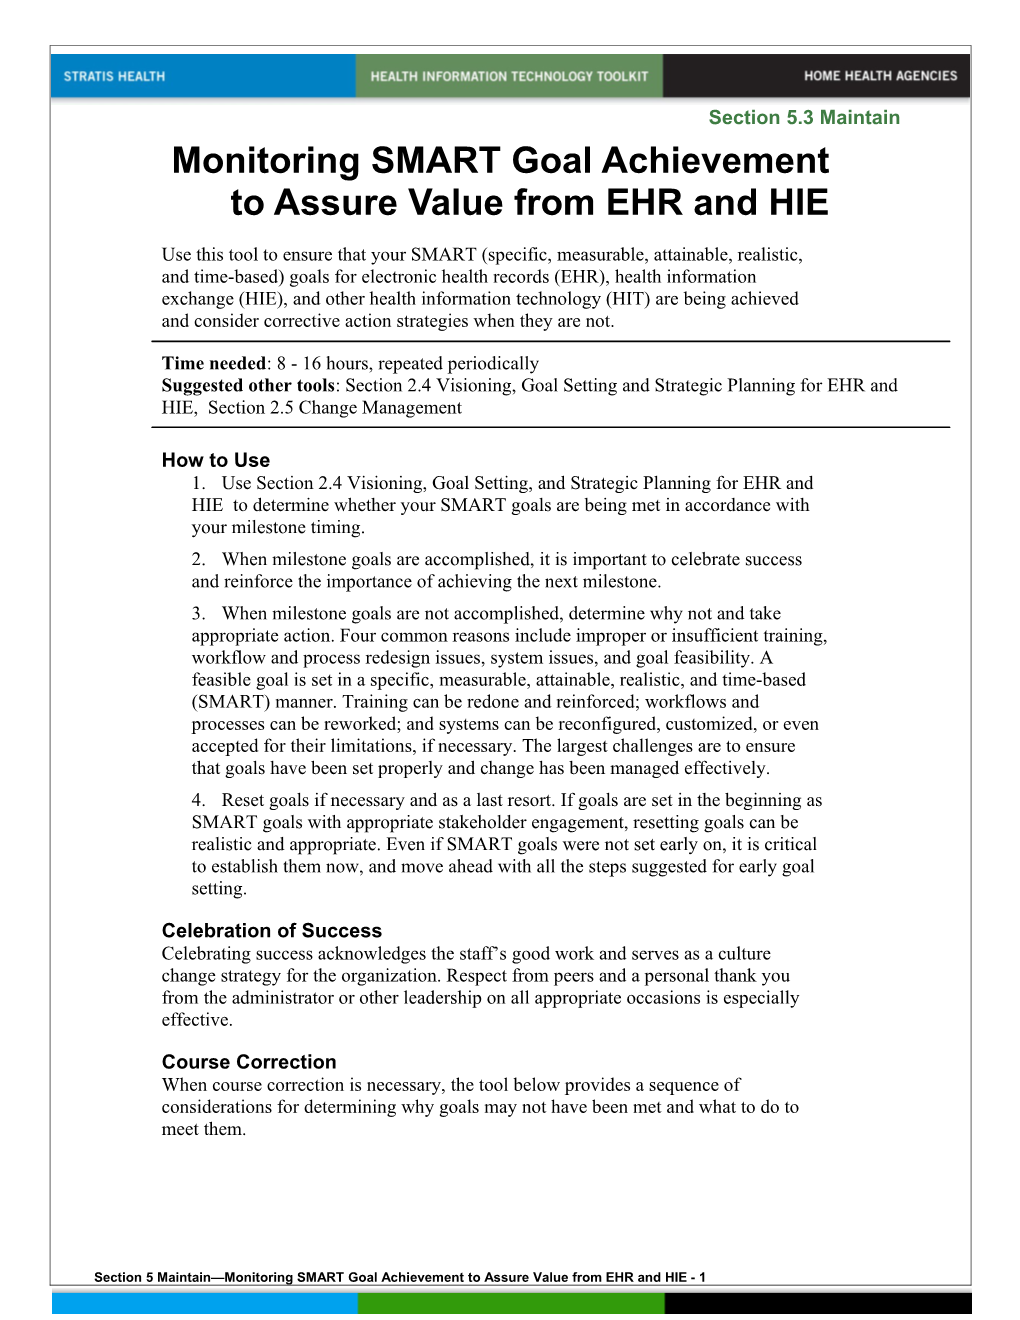 5 Monitoring SMART Goal Achievement to Assure Value from EHR and HIE s1